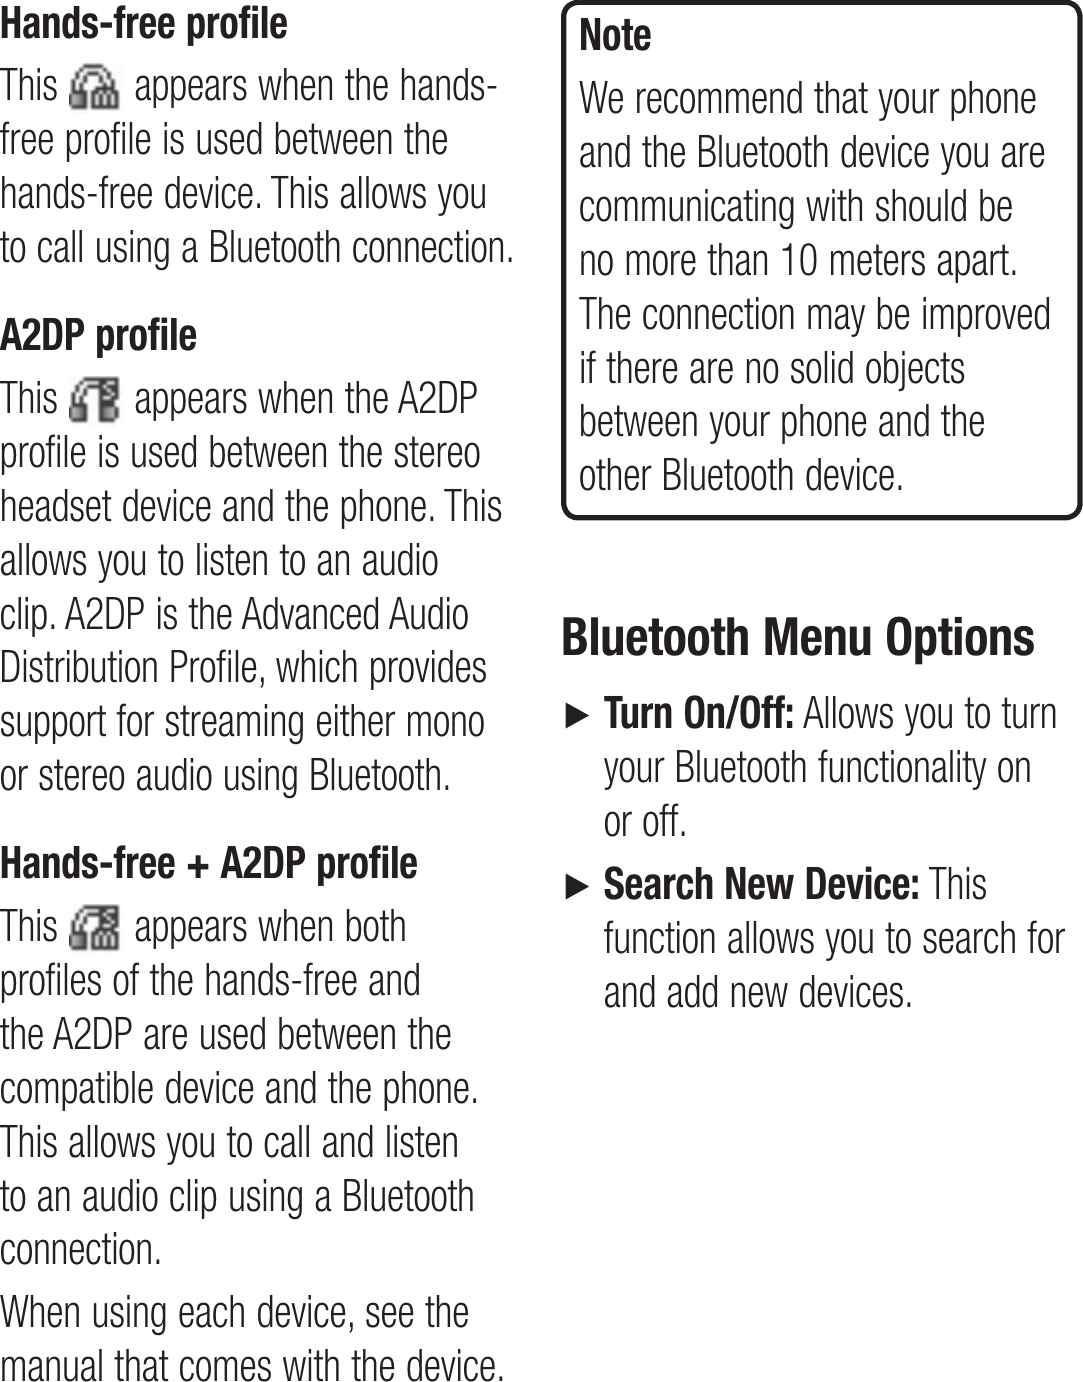 Hands-free profileThis   appears when the hands-free profile is used between the hands-free device. This allows you to call using a Bluetooth connection.A2DP profileThis   appears when the A2DP profile is used between the stereo headset device and the phone. This allows you to listen to an audio clip. A2DP is the Advanced Audio Distribution Profile, which provides support for streaming either mono or stereo audio using Bluetooth.Hands-free + A2DP profileThis   appears when both profiles of the hands-free and the A2DP are used between the compatible device and the phone. This allows you to call and listen to an audio clip using a Bluetooth connection.When using each device, see the manual that comes with the device.NoteWe recommend that your phone and the Bluetooth device you are communicating with should be no more than 10 meters apart. The connection may be improved if there are no solid objects between your phone and the other Bluetooth device.Bluetooth Menu Options►    Turn On/Off: Allows you to turn your Bluetooth functionality on or off.►    Search New Device: This function allows you to search for and add new devices.